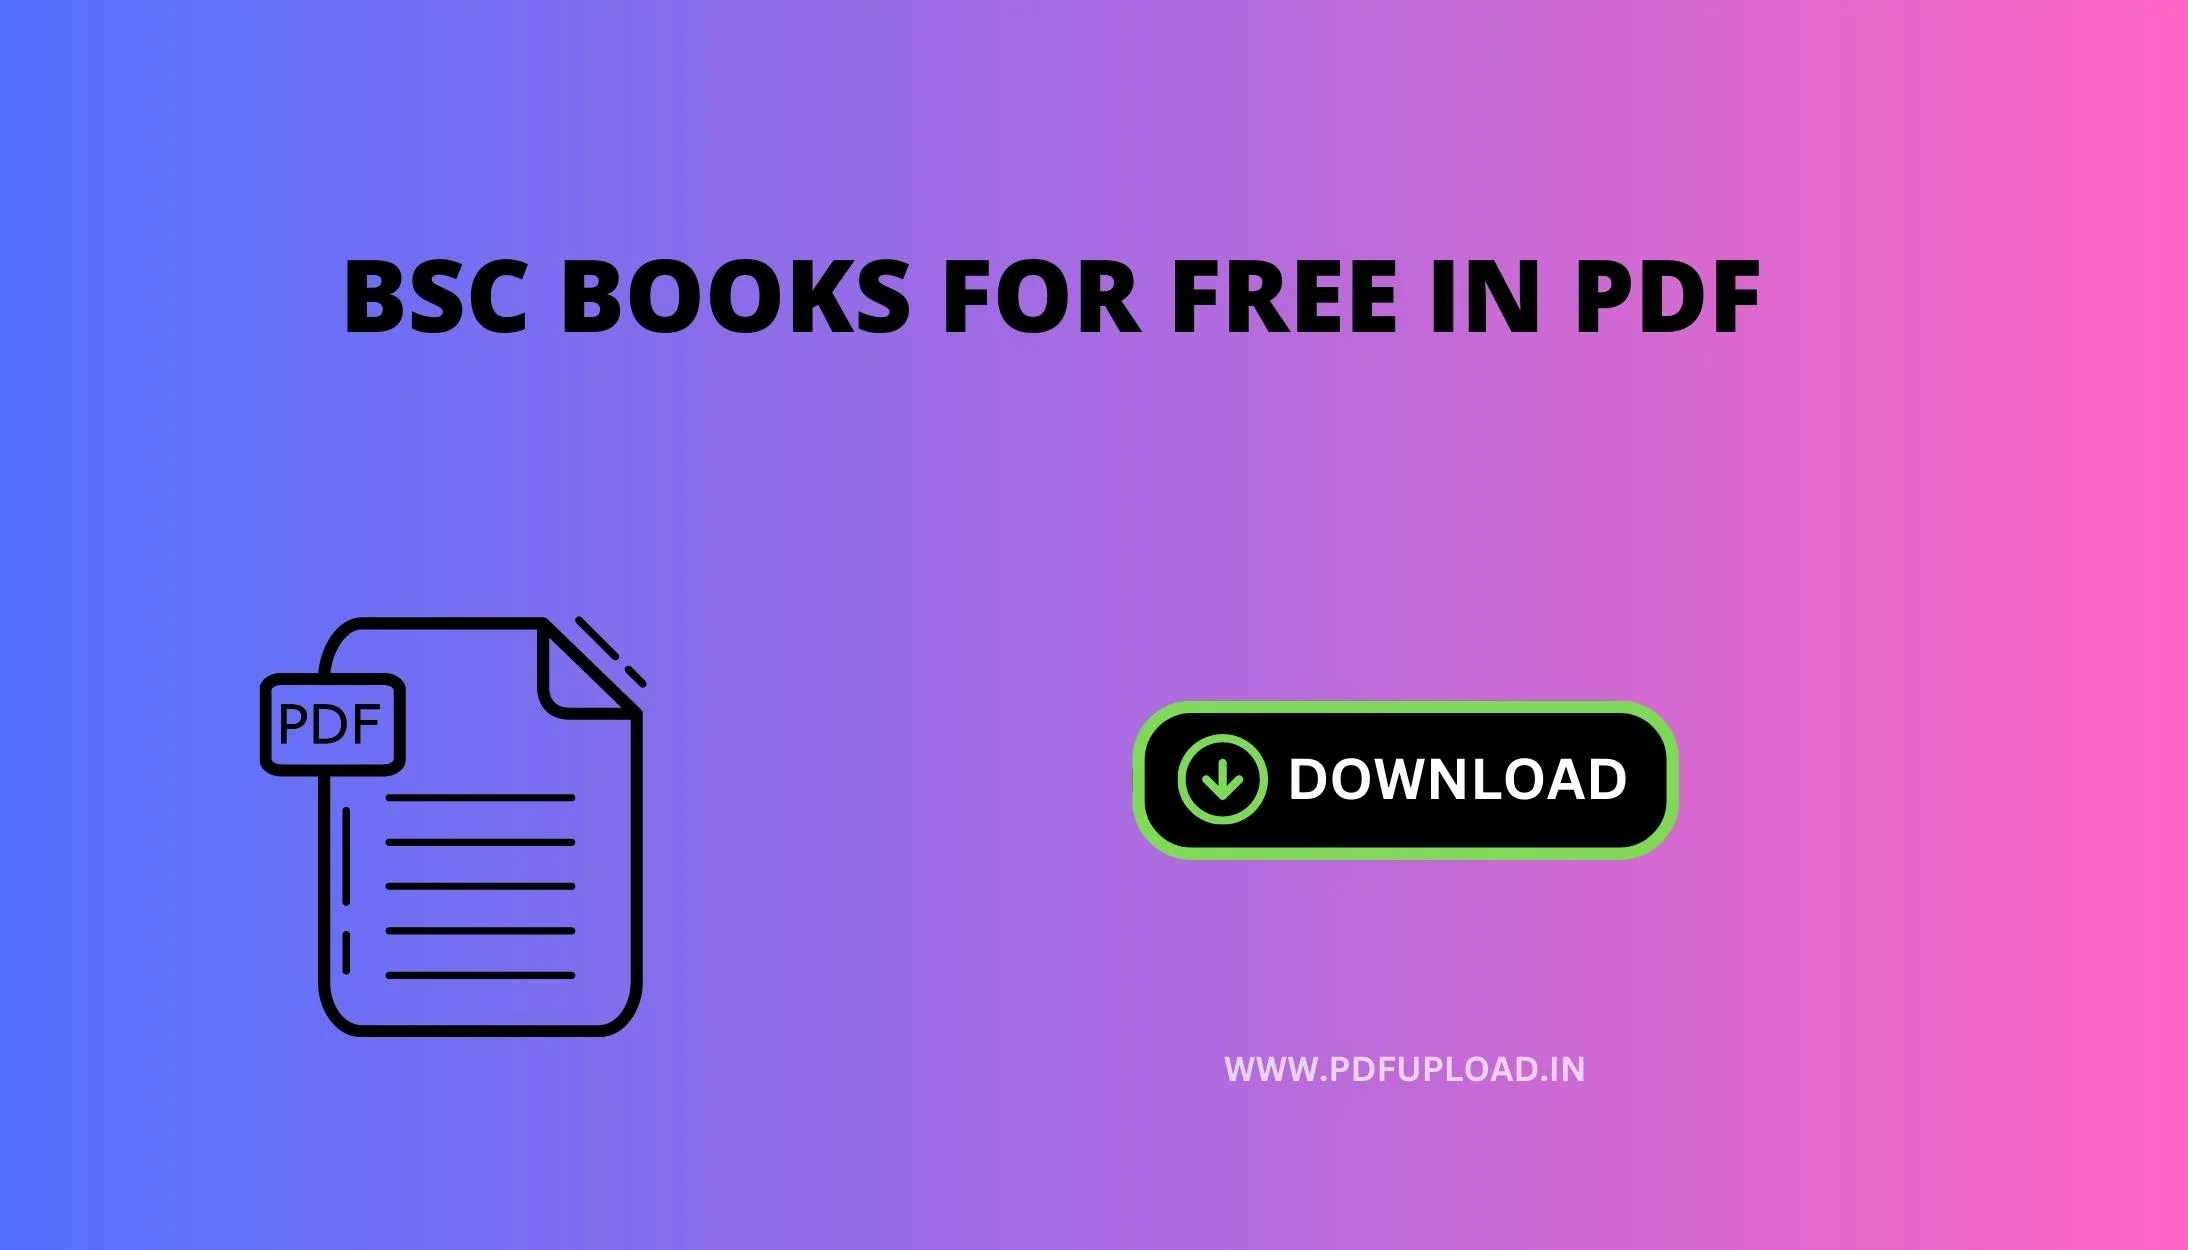 BSc Books For Free In Pdf